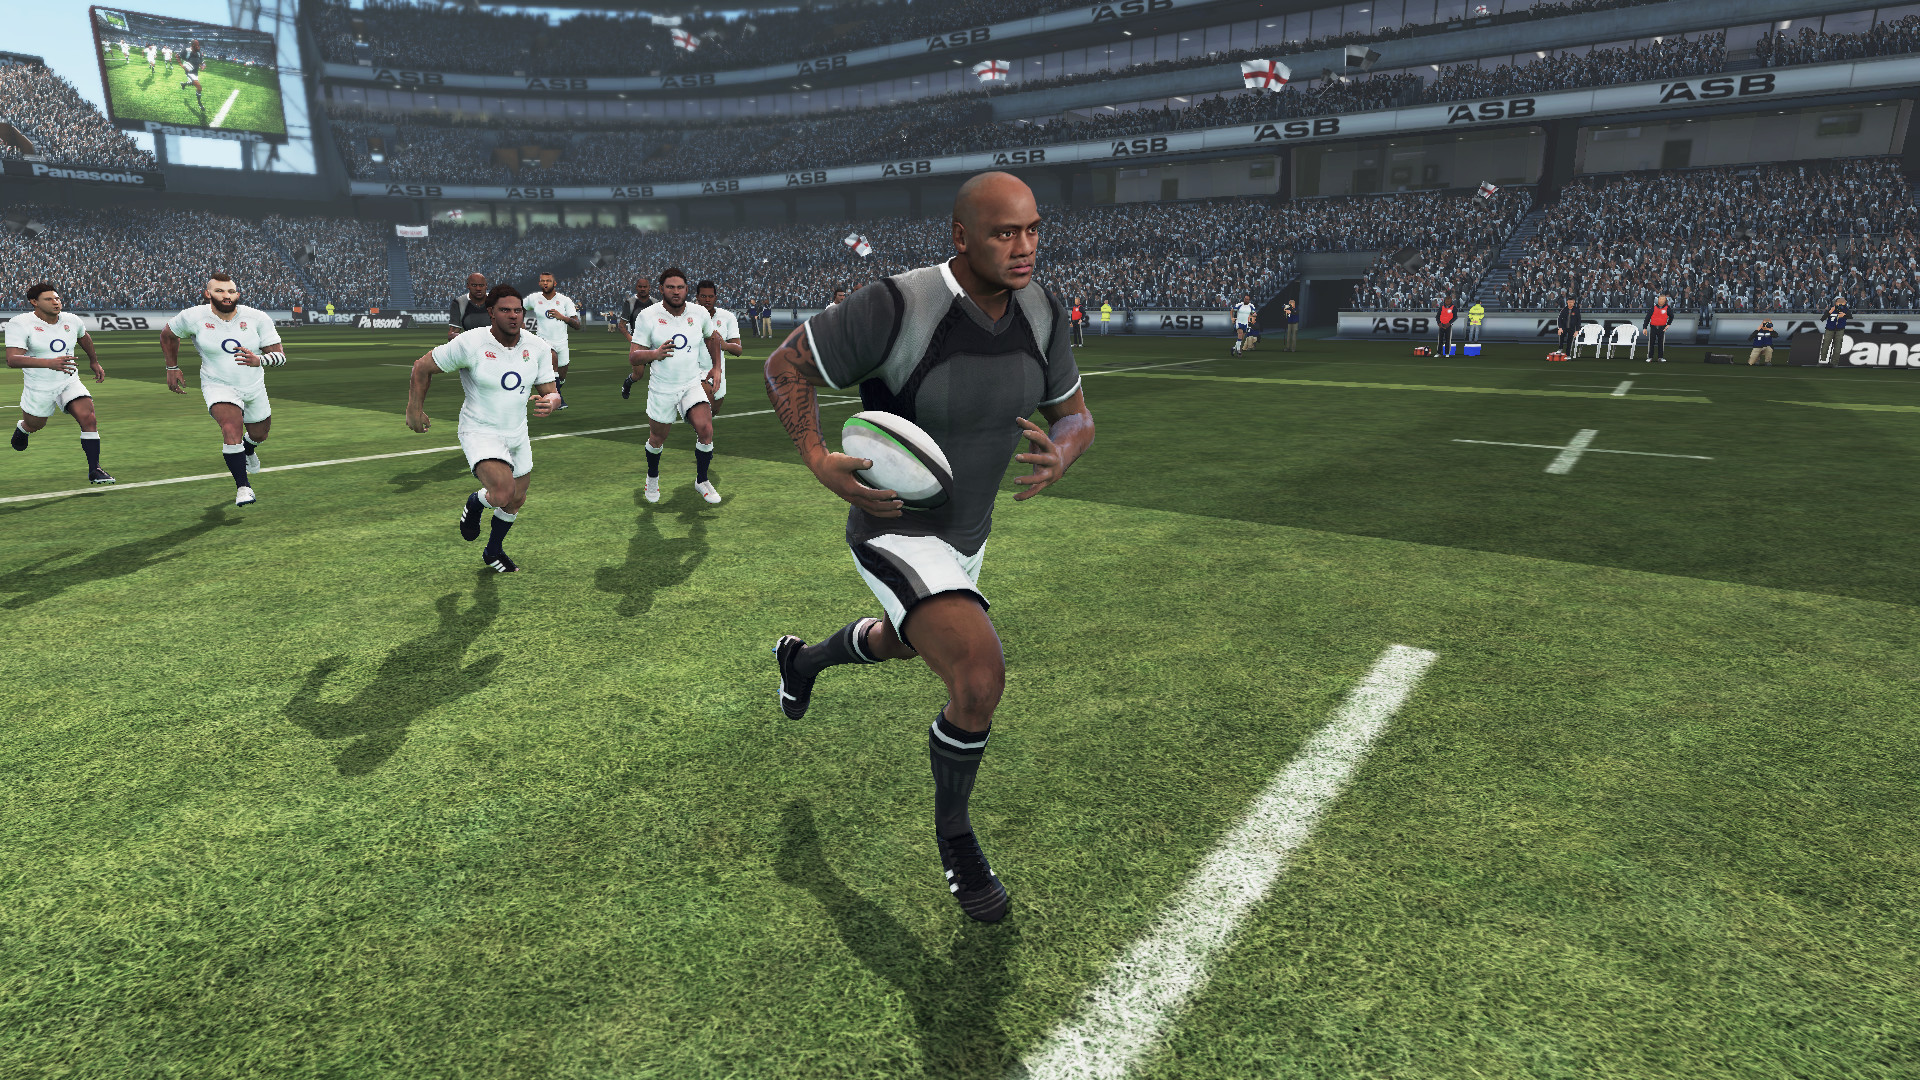 rugby 18 download pc